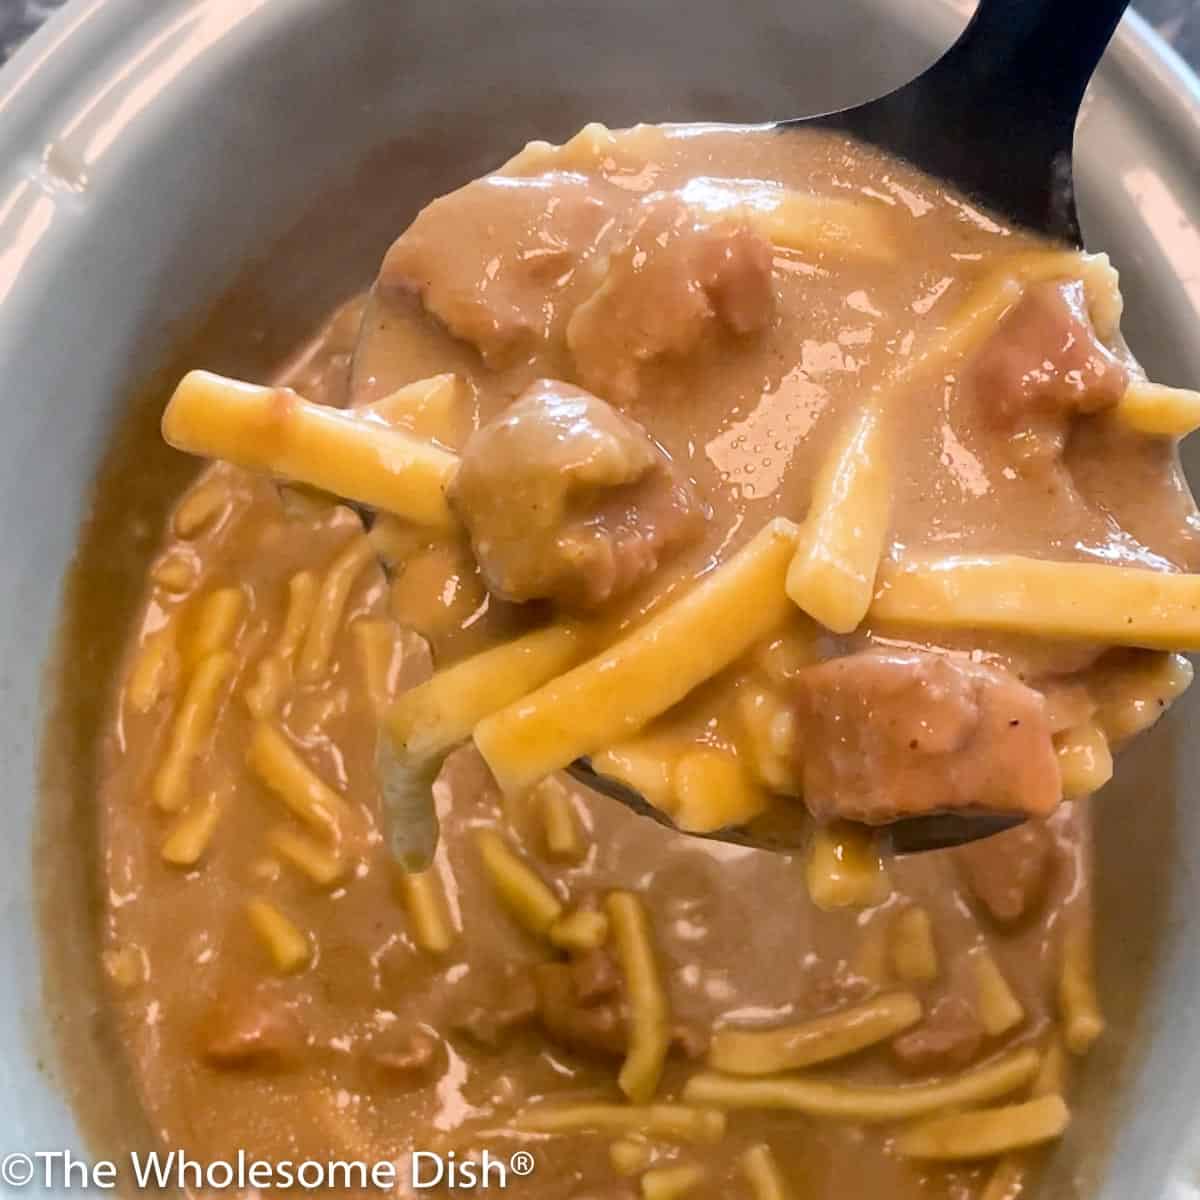 A ladle full of beef & noodles being lifted out of a crock pot.